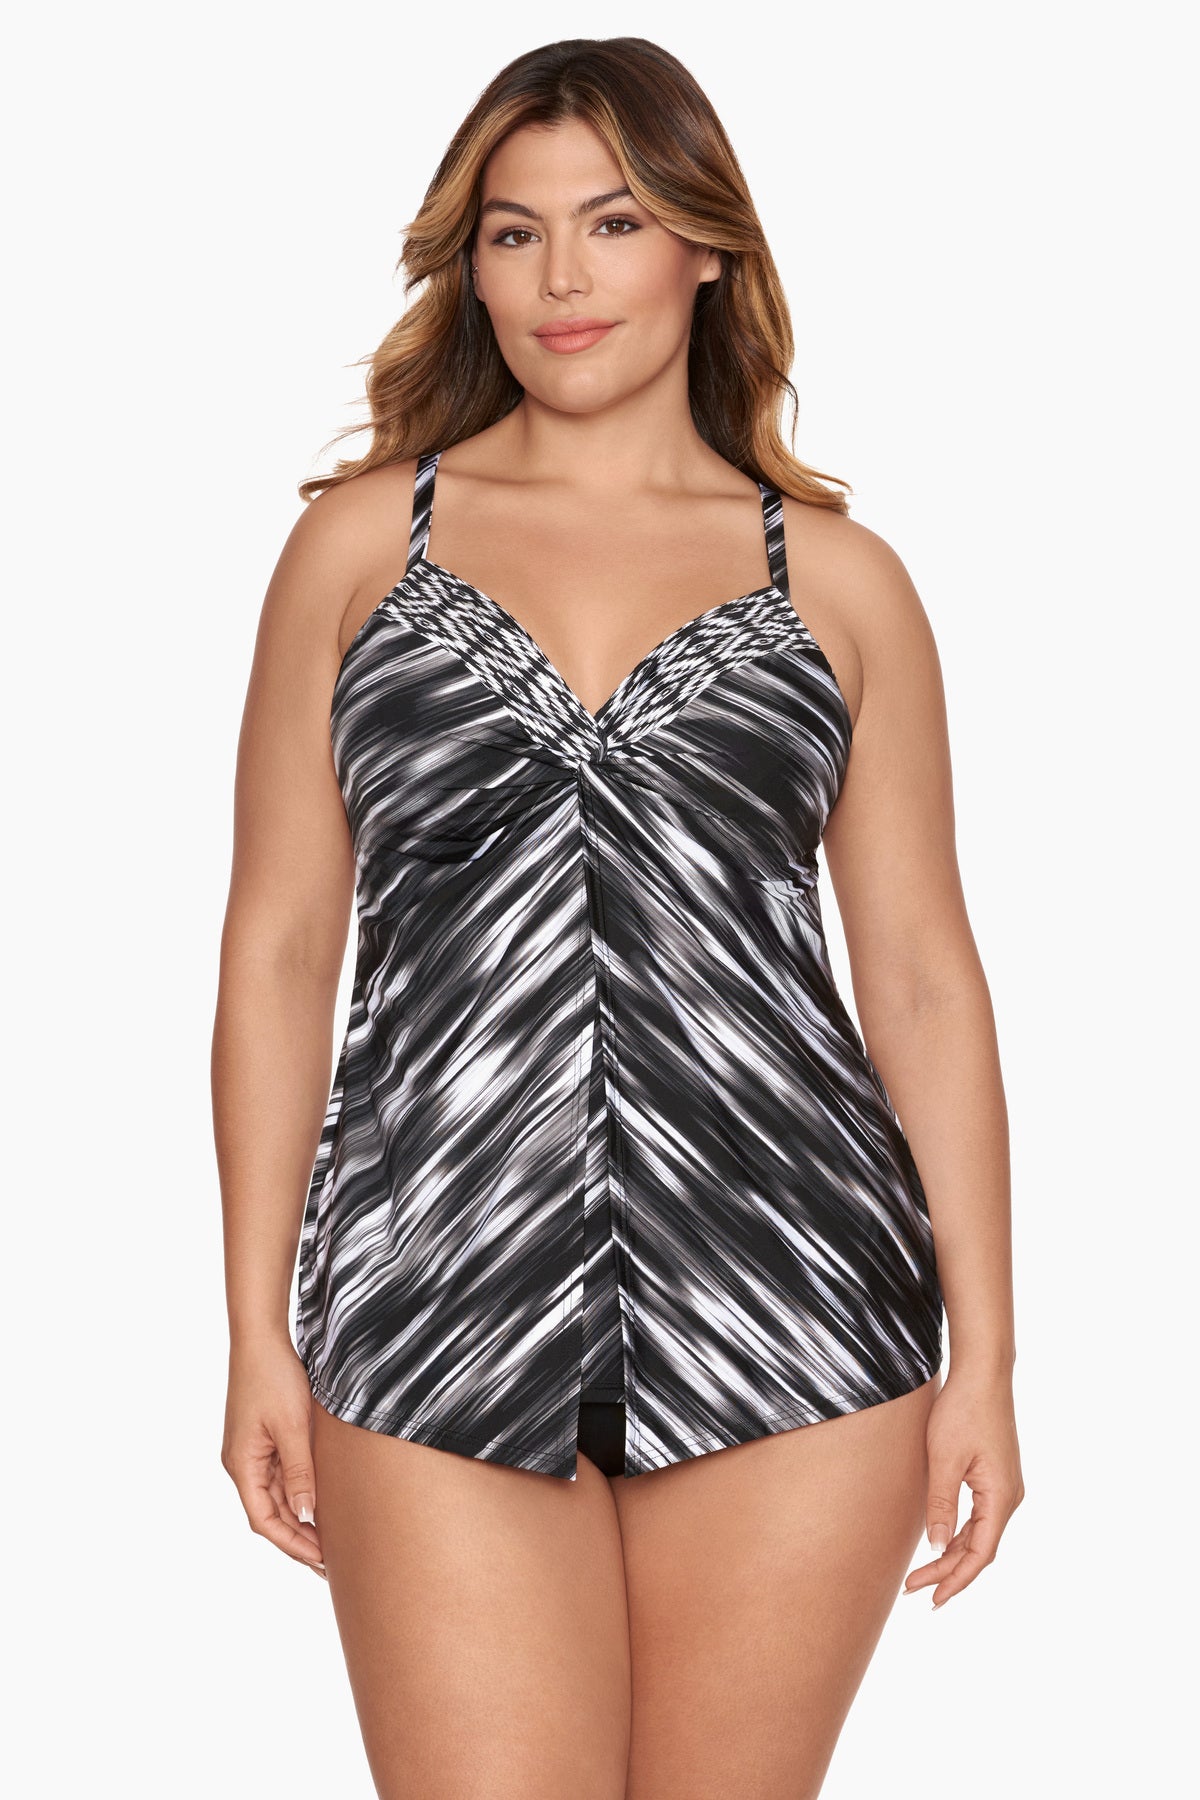 MIRACLESUIT WARP SPEED LOVE KNOT UNDERWIRE TANKINI TOP DD CUP